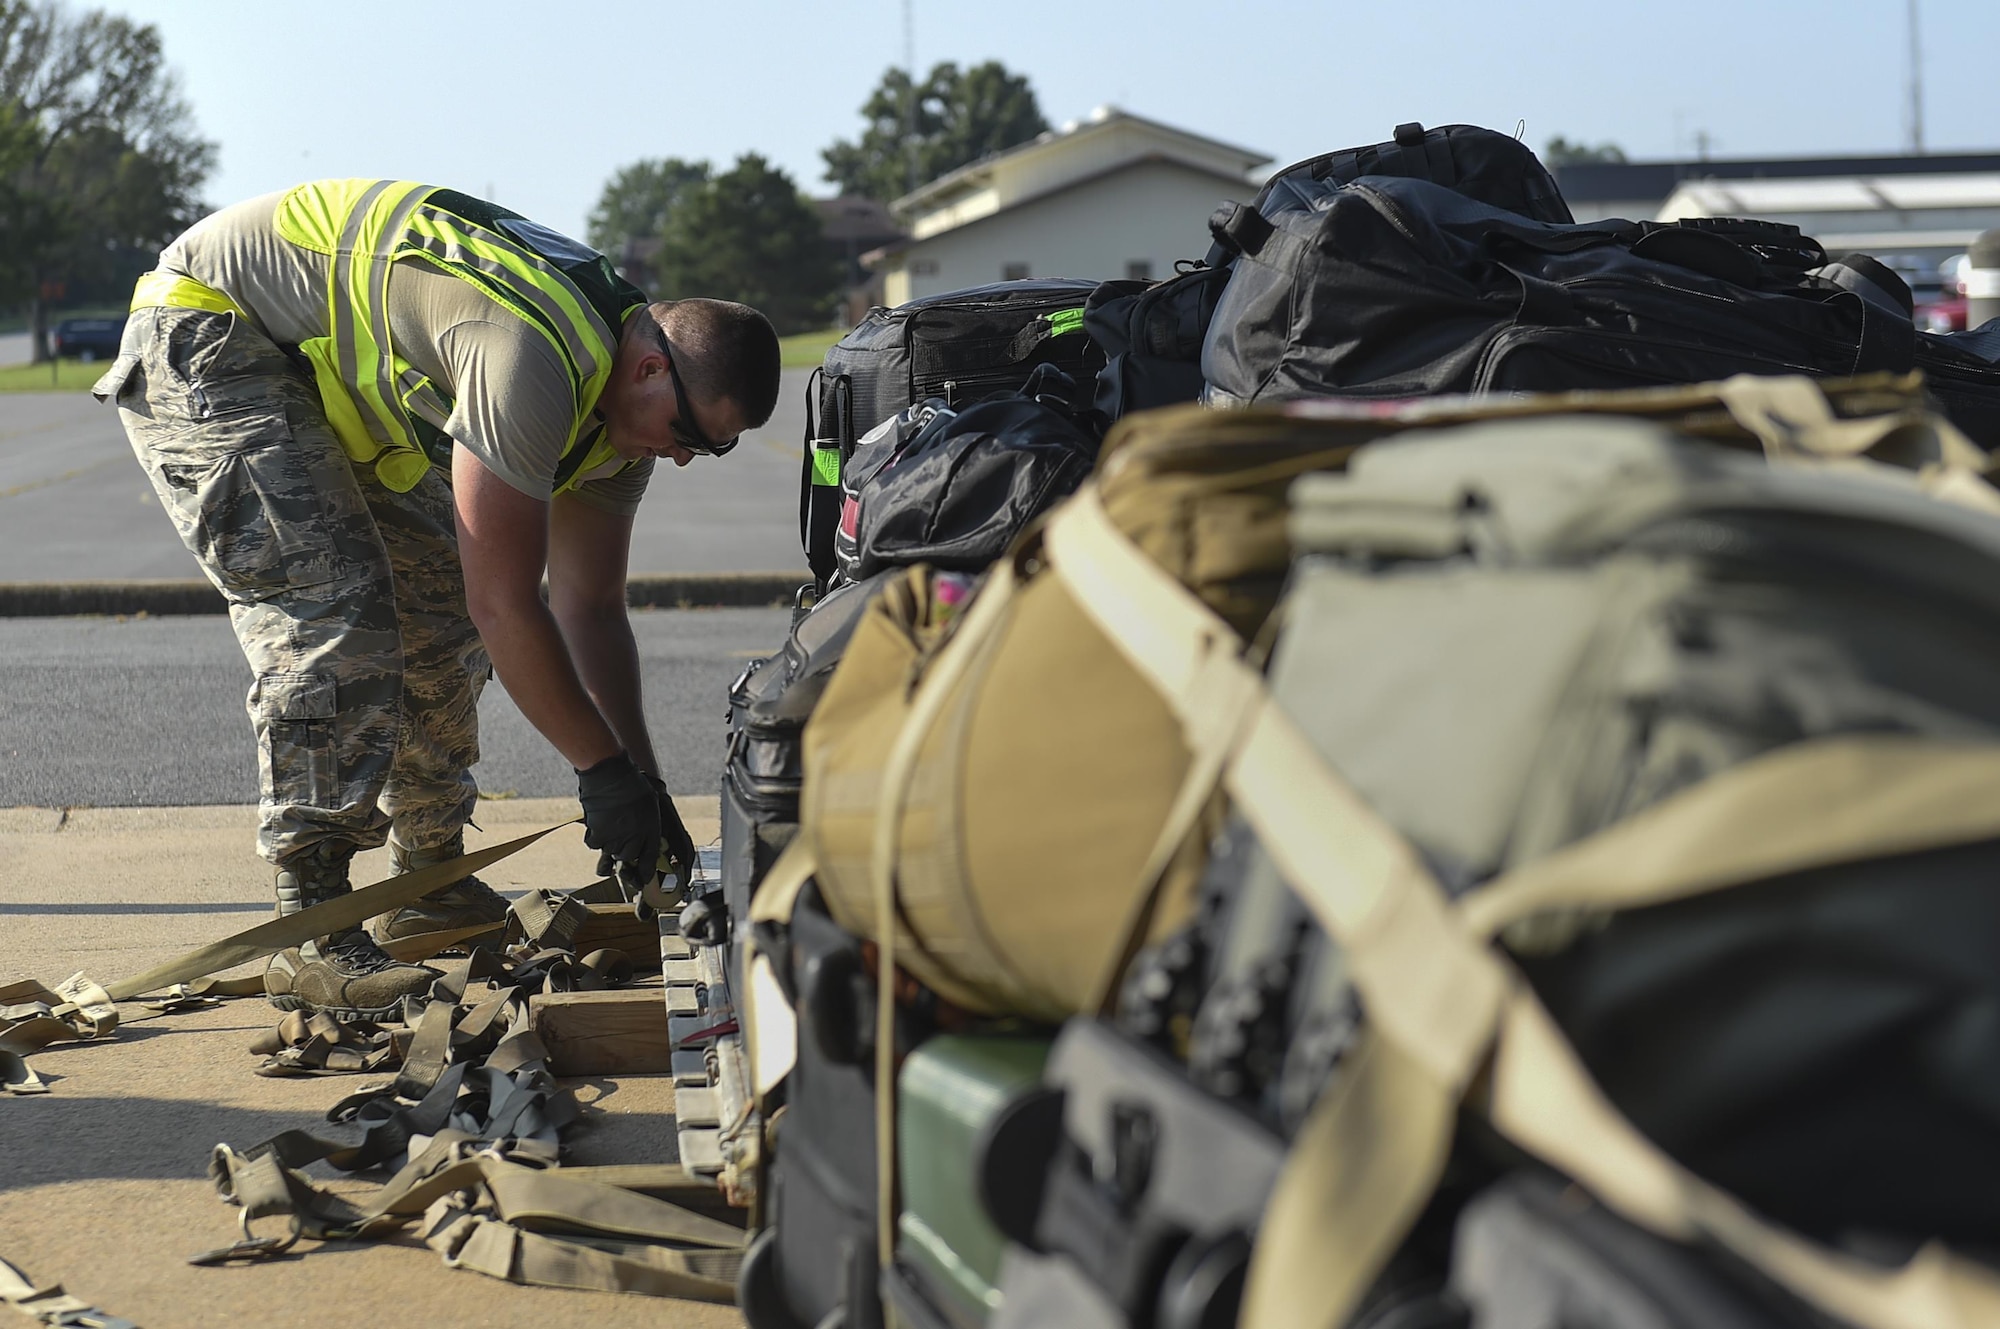 Senior Airman Troy Iversen, 19th Logistics Readiness Squadron aerial delivery rigger, secures baggage cargo onto a pallet July 20, 2017, at Little Rock Air Force Base, Ark. More than 3,000 Air Mobility Command Airmen will travel to Washington in order to participate in Mobility Guardian 2017, a massive exercise testing airlift and airdrop capabilities alongside 25 international partners. (U.S. Air Force photo by Staff Sgt. Harry Brexel)